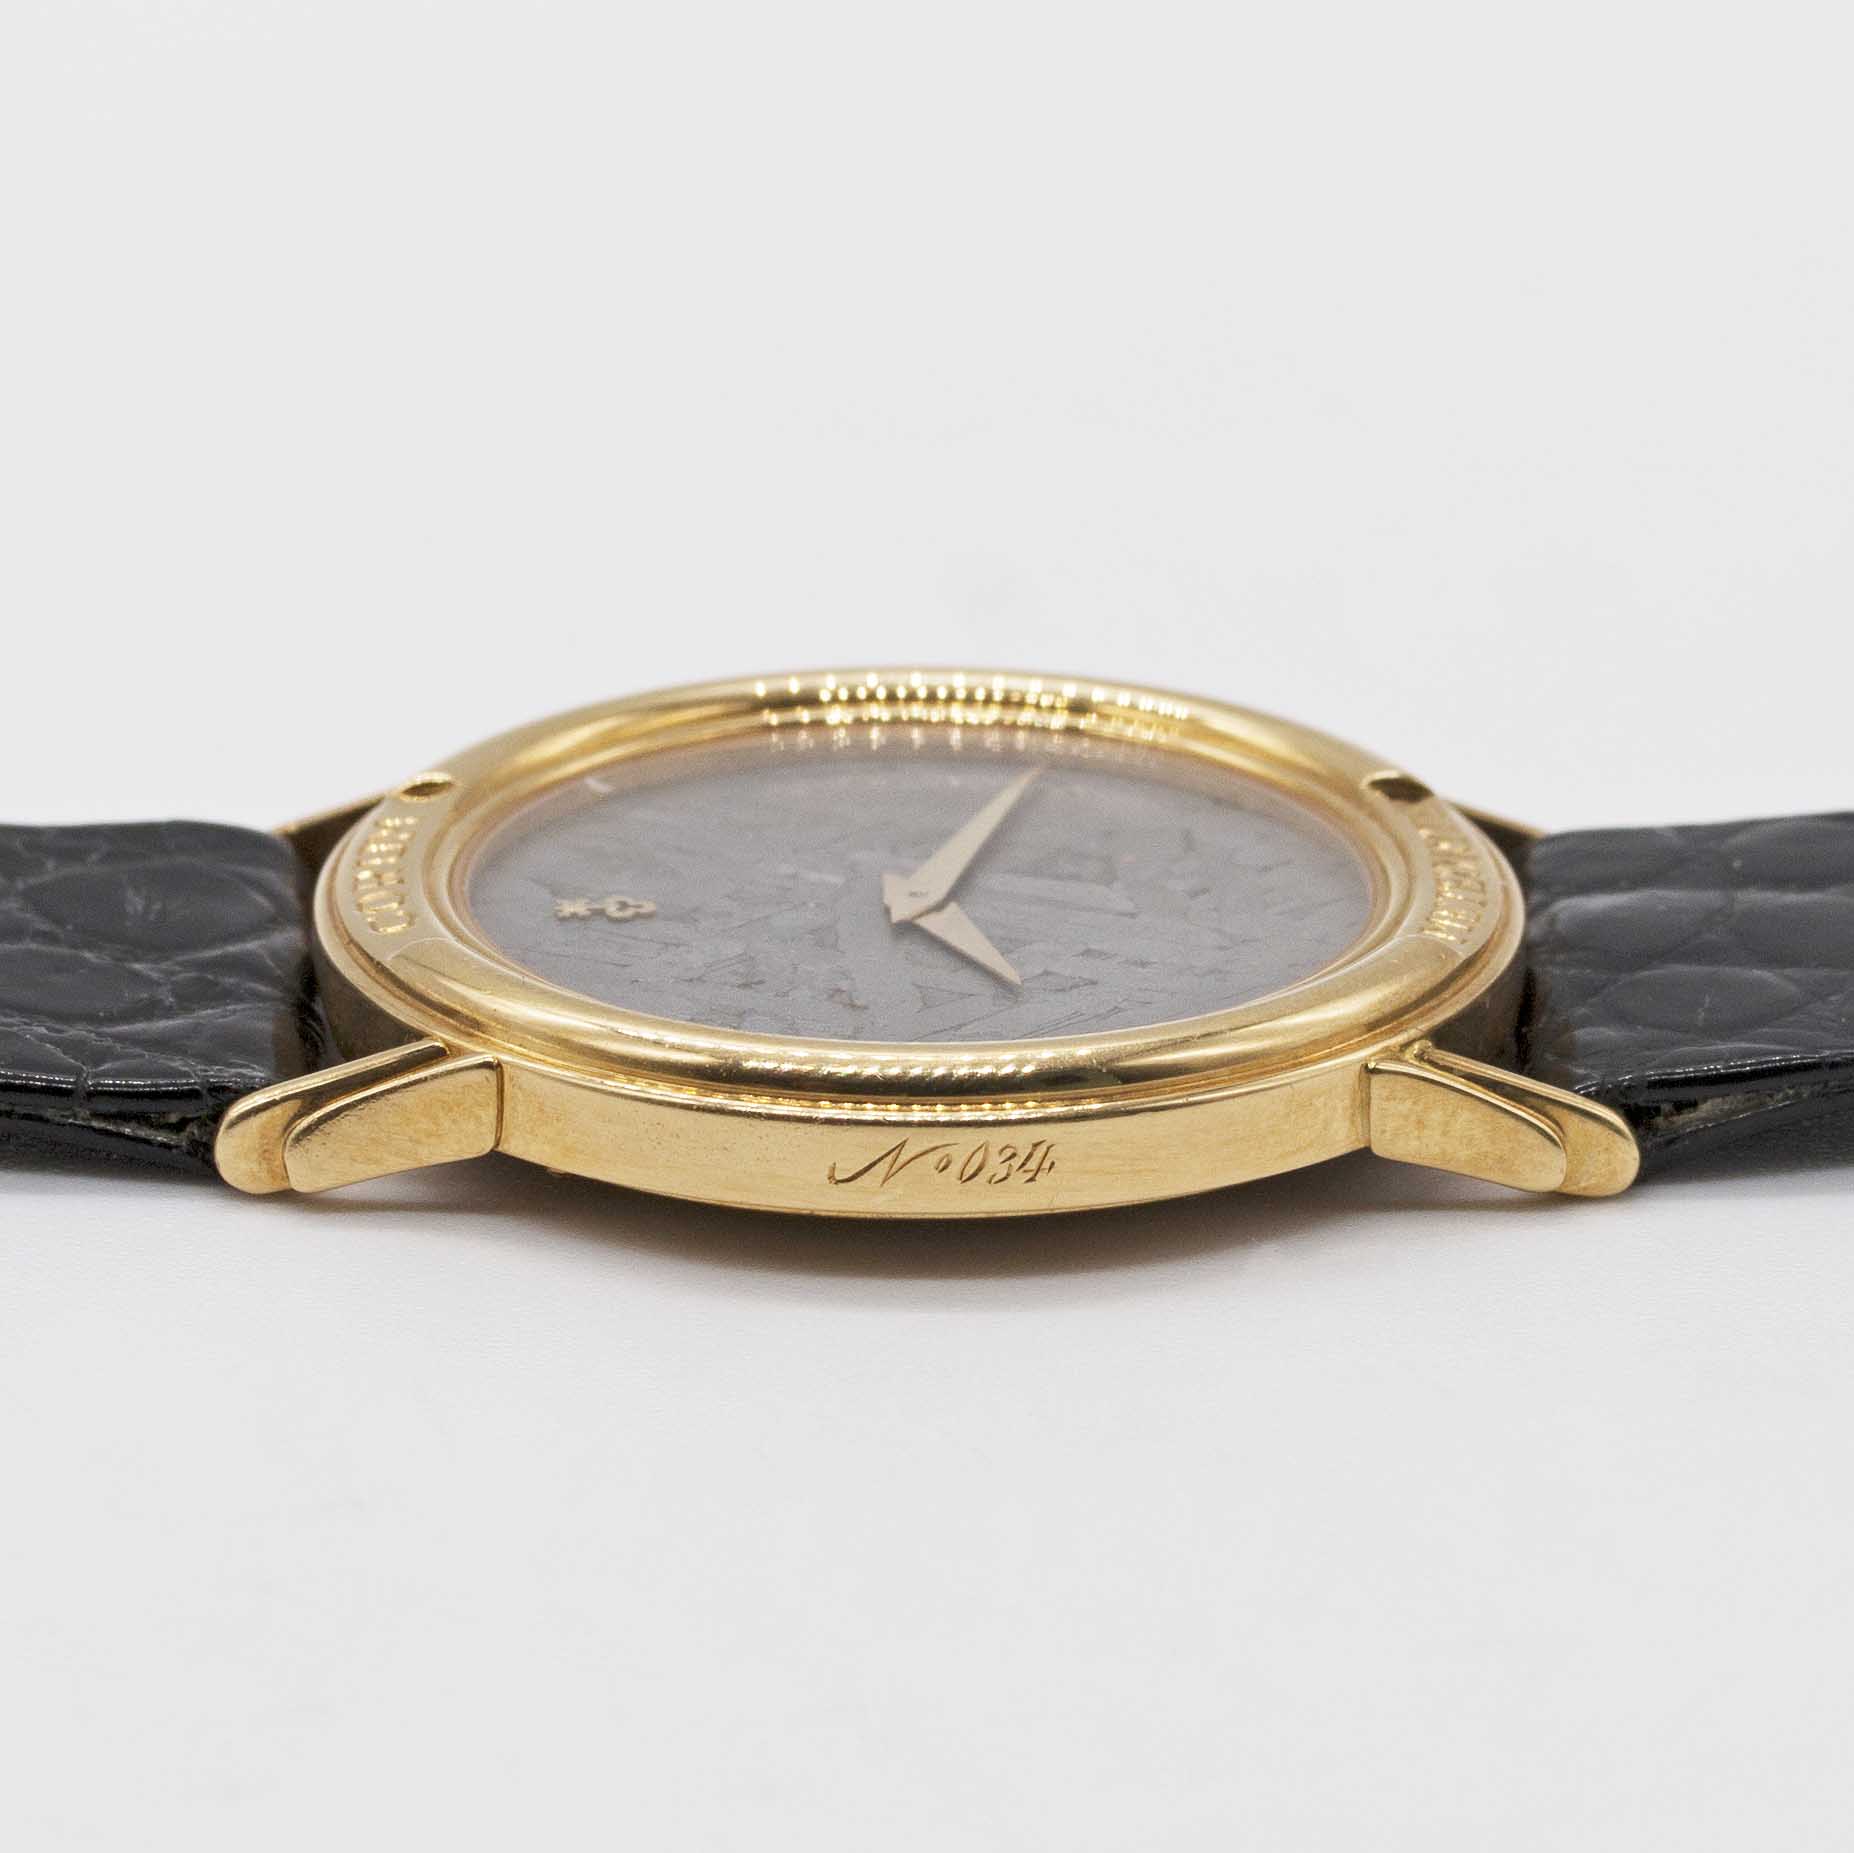 AN 18K SOLID YELLOW GOLD CORUM METEORITE WRIST WATCH CIRCA 1990s, REF. 50450-56 WITH "METEORITE DIAL - Image 8 of 8